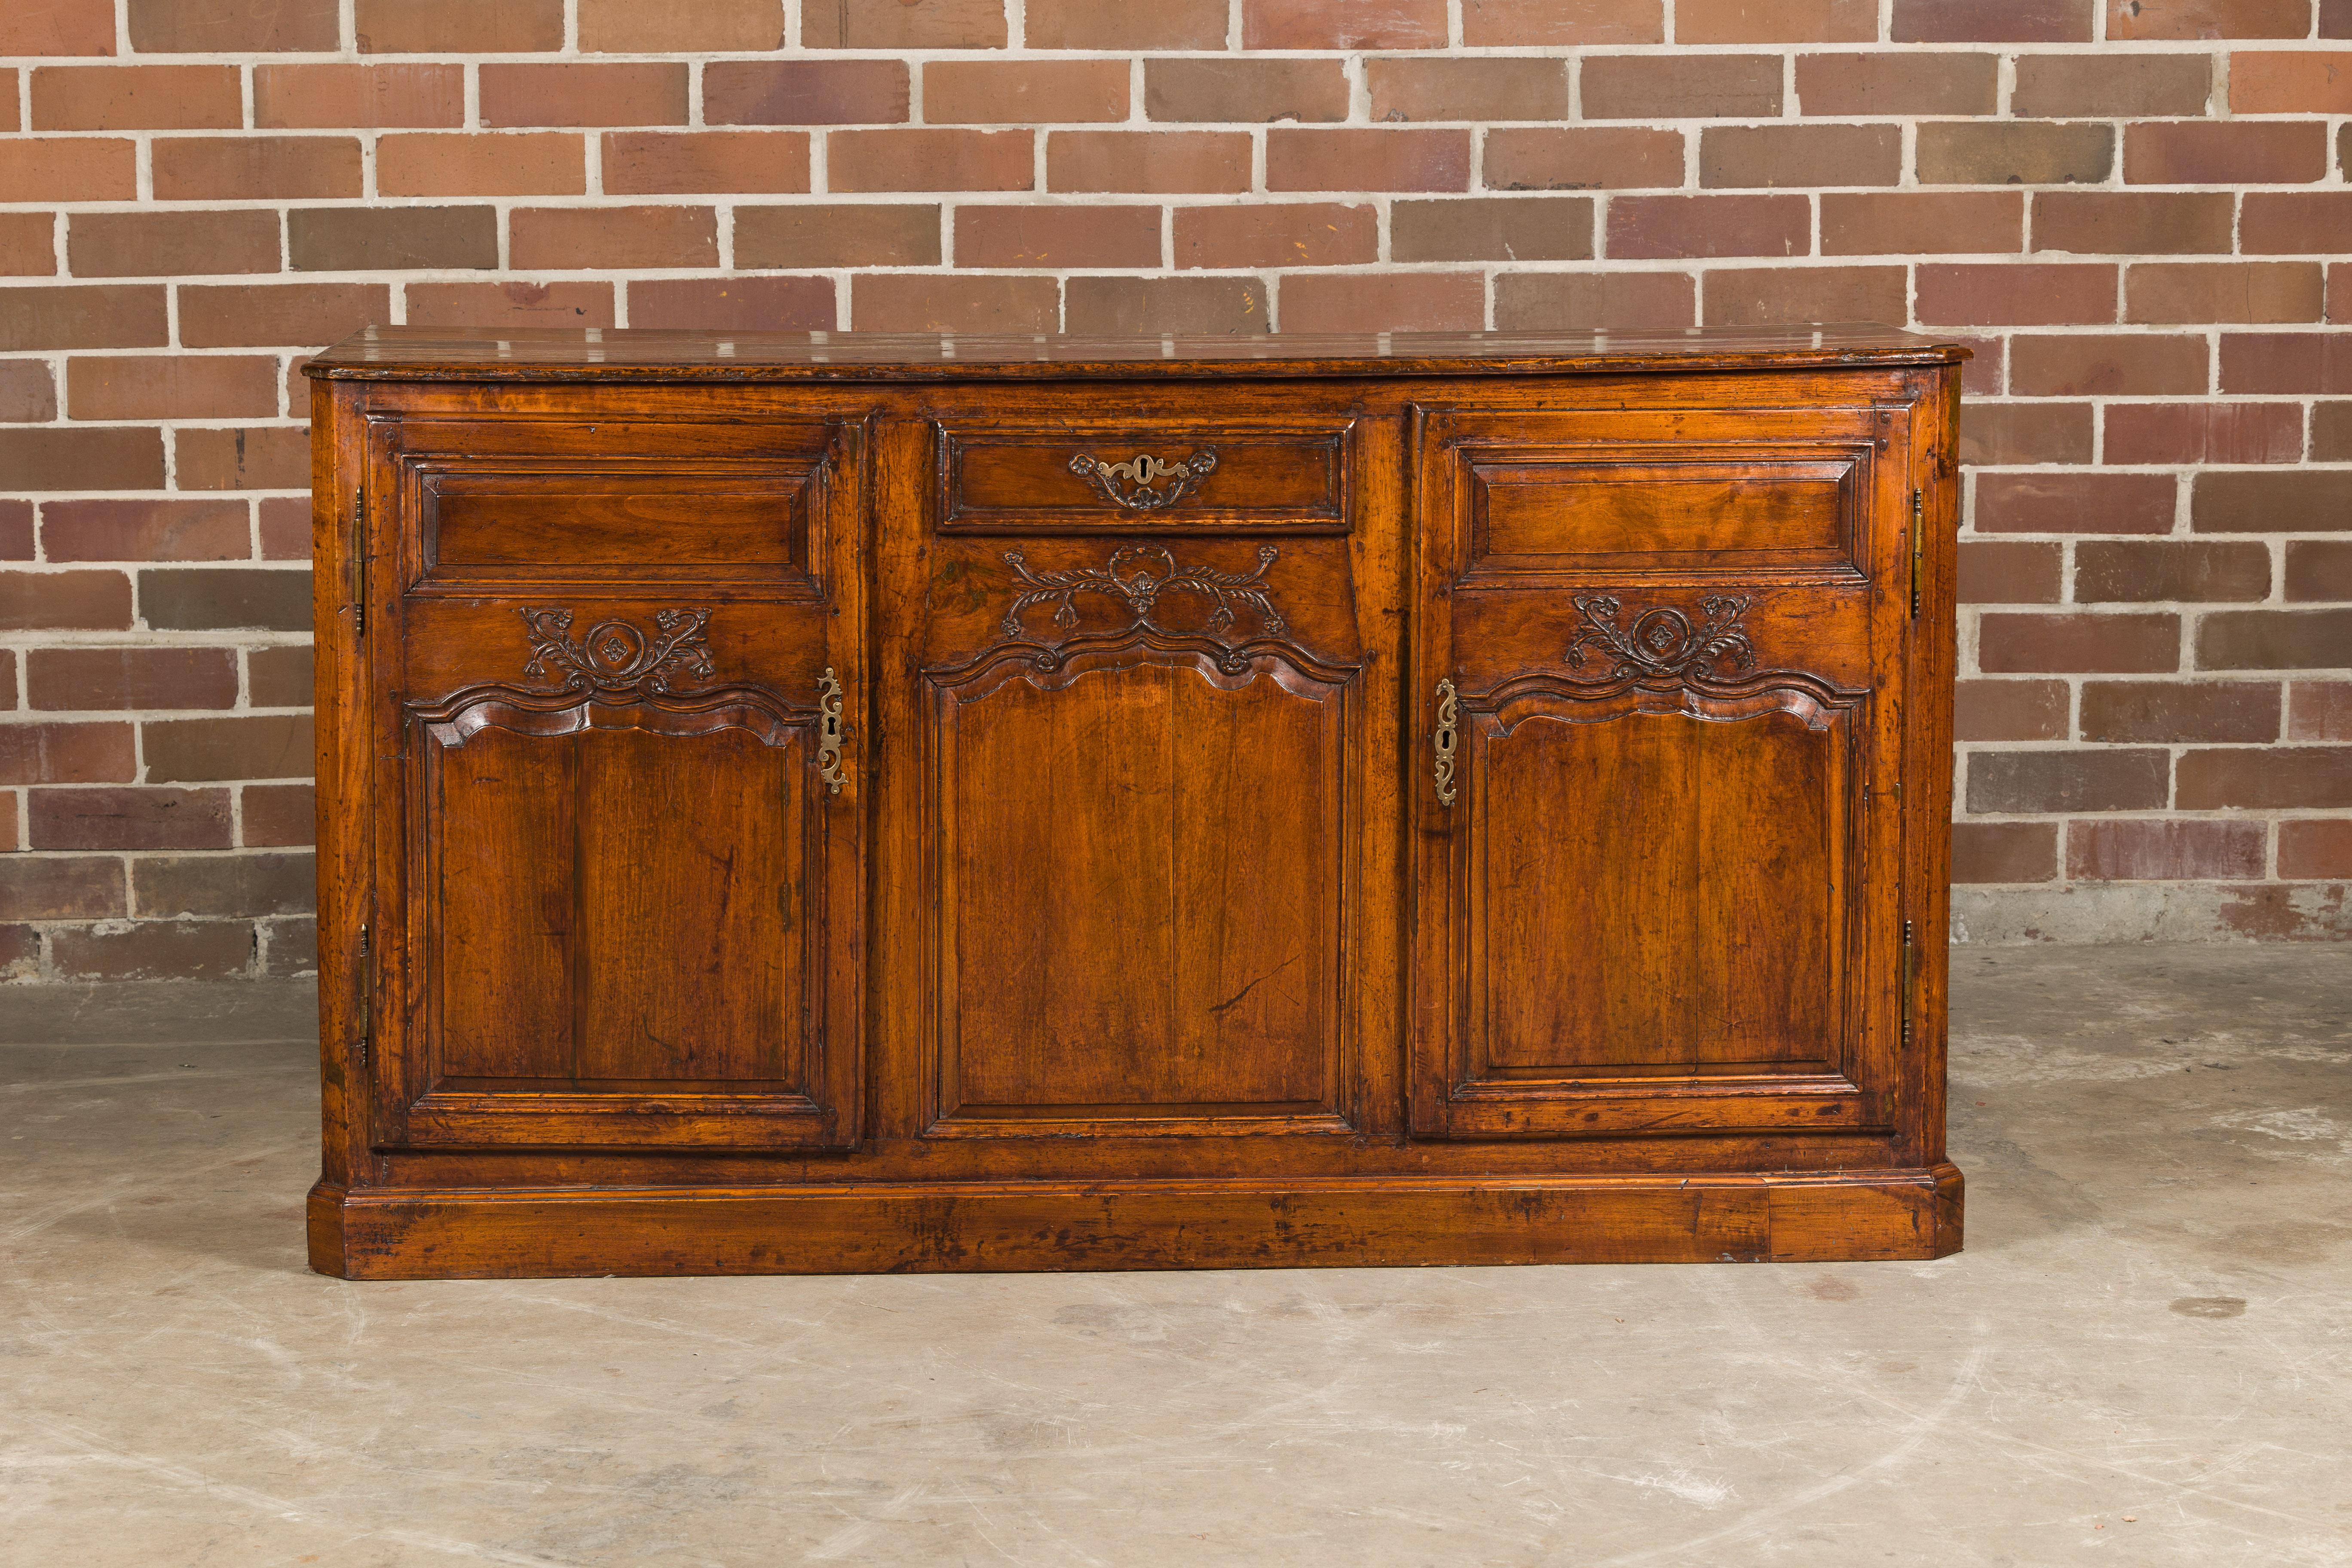 A French walnut buffet from the 19th century with two doors, a single drawer and carved foliage décor. Indulge in the timeless elegance of this French walnut buffet from the 19th century, a piece that marries classic design with exquisite